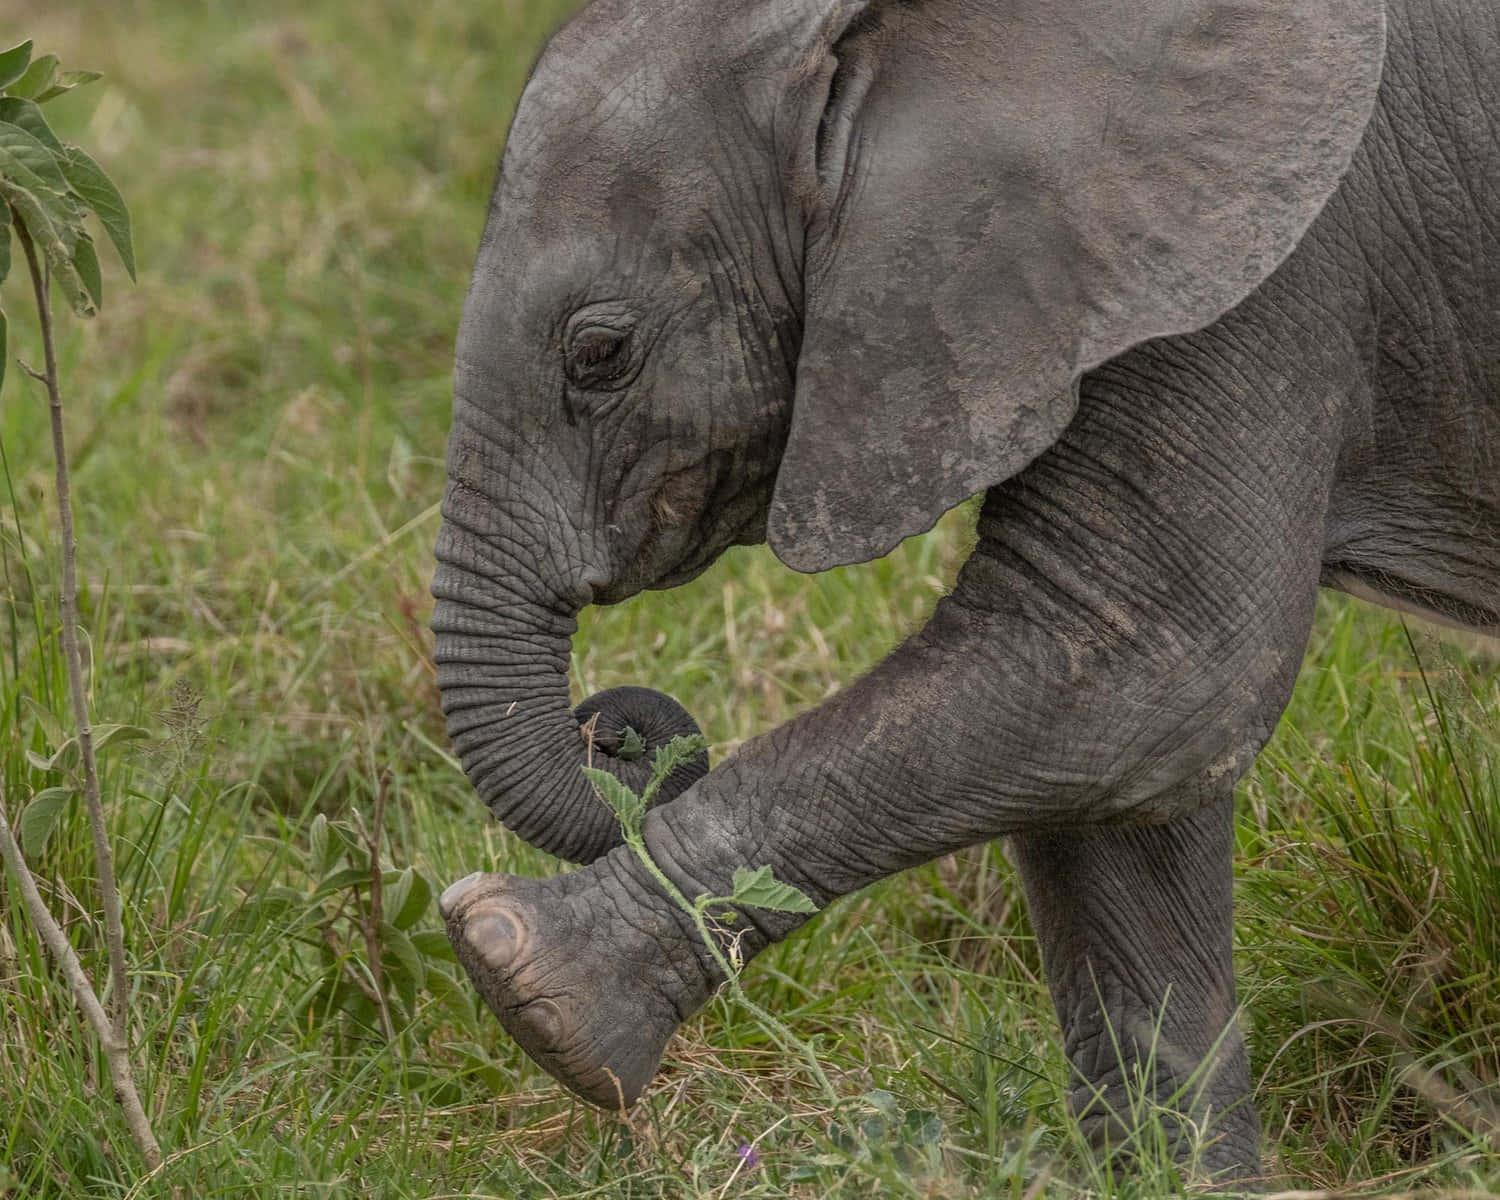 A Playful Baby Elephant frolicking in the wild